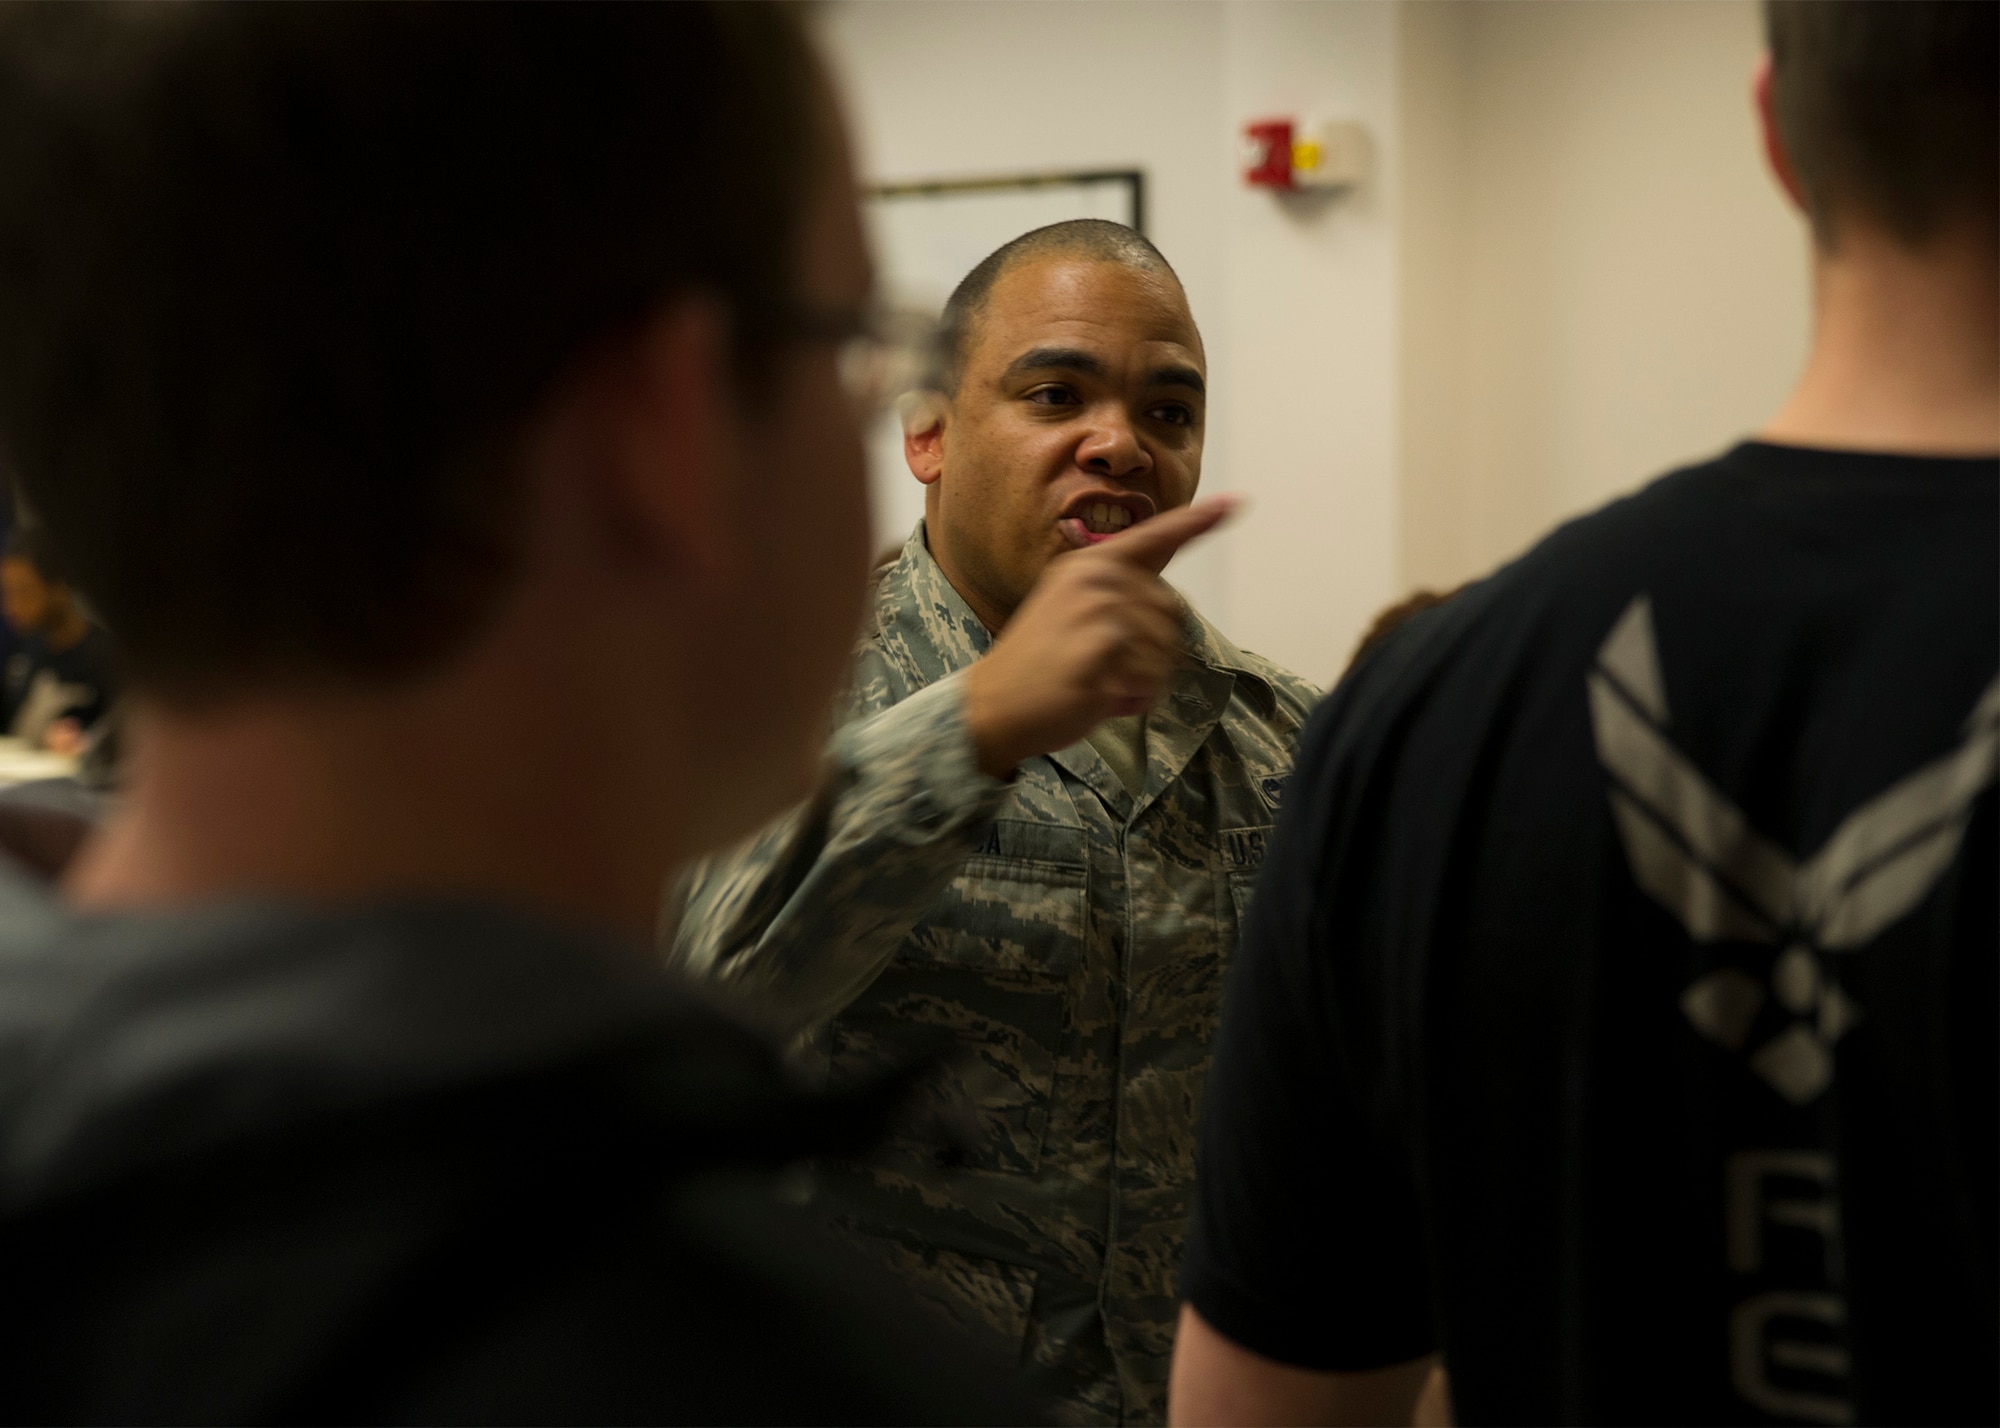 Airman 1st Class Ricky Roa, 38th Aerial Port Squadron at Joint Base Charleston, plays to role of an MTI at basic training for trainees in the Development and Training Flight January 9, 2016 at JB Charleston. Trainees were exposed to a typical dining facility experience in order to prepare them for BMT.